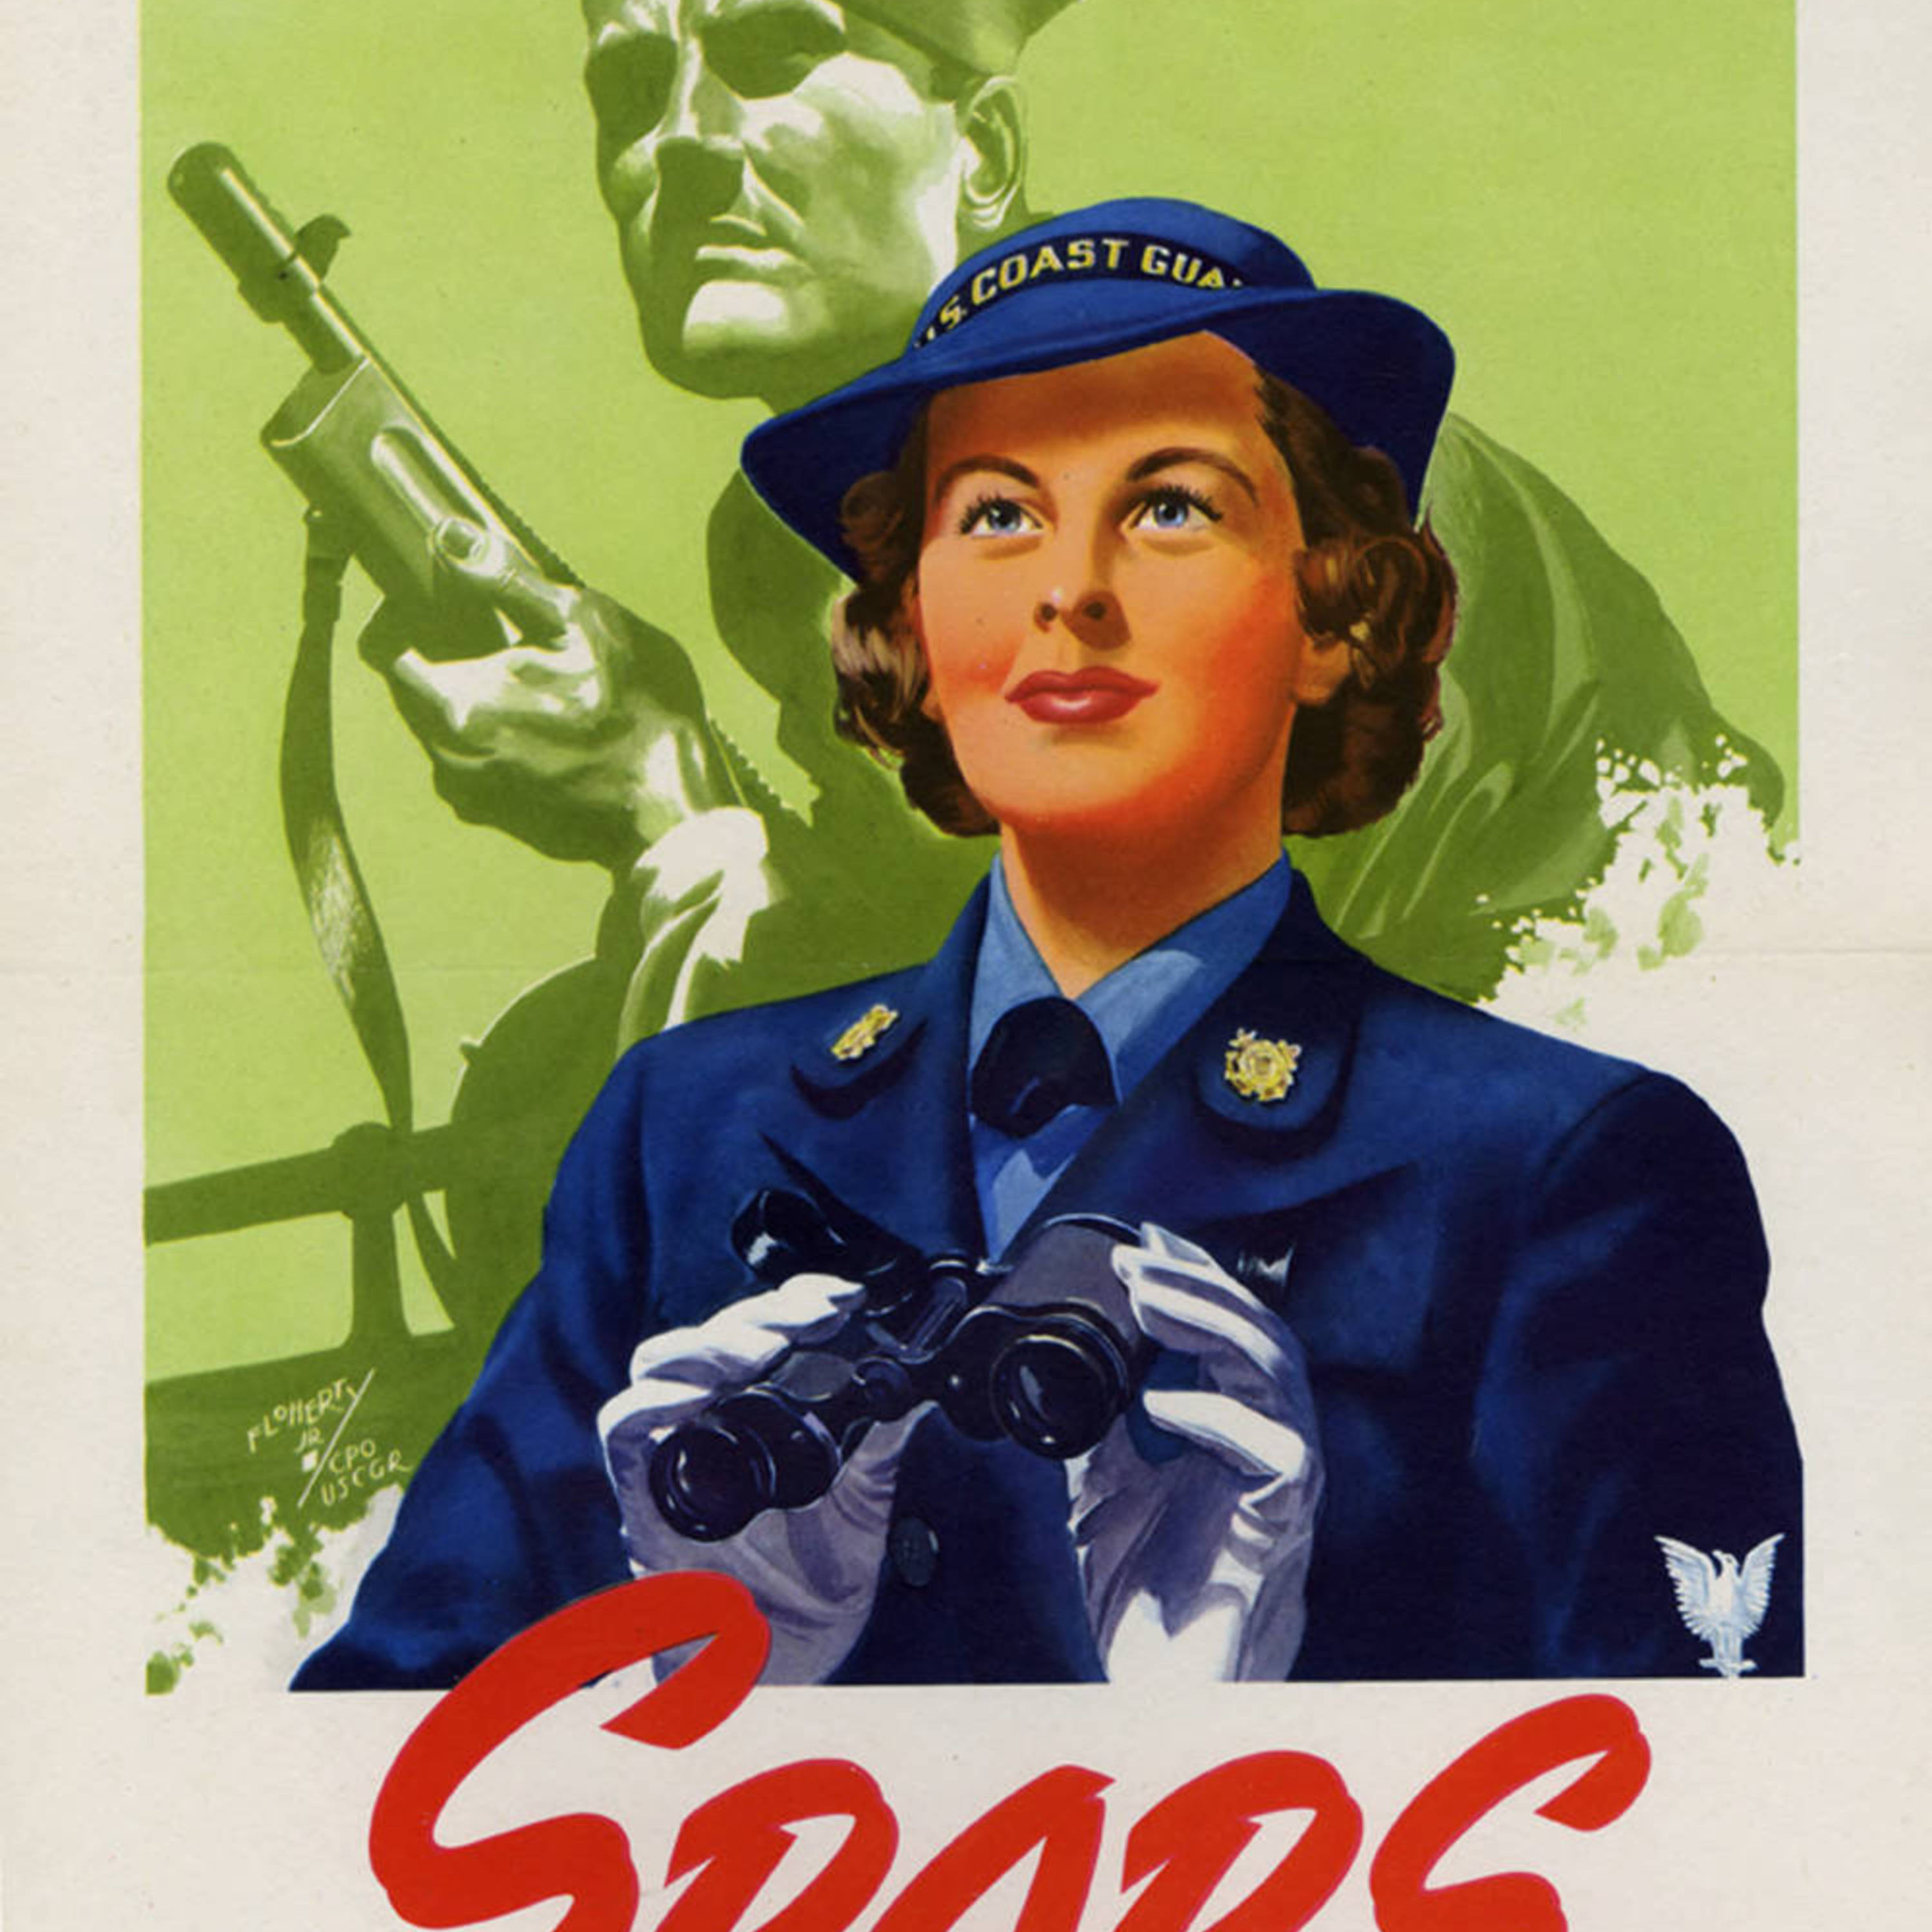 SPARS recruitment poster